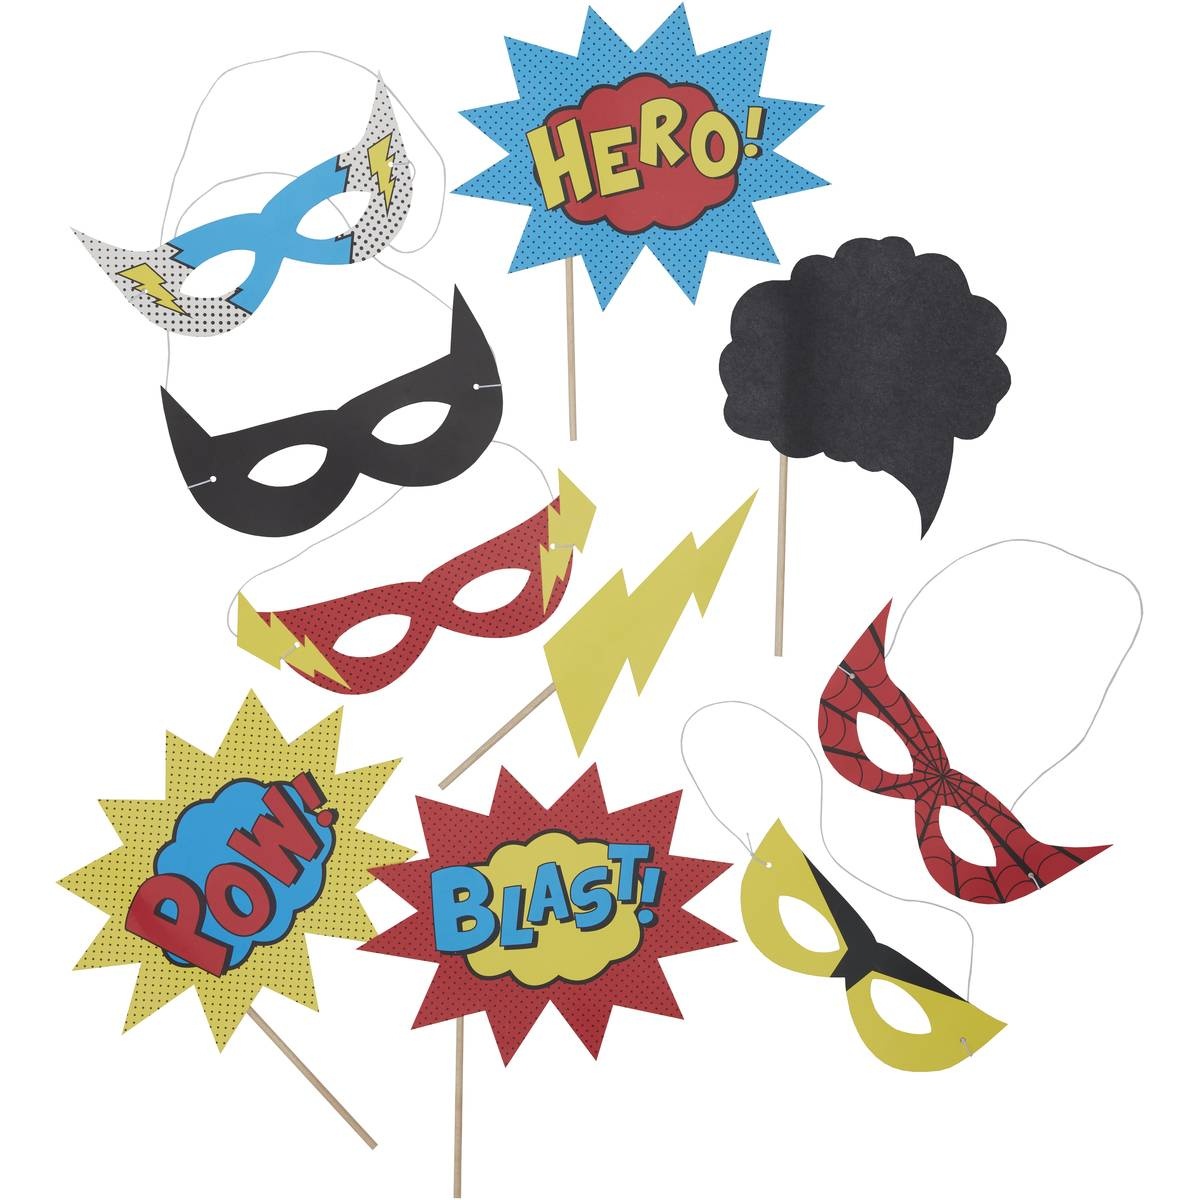 Photo Booth Props | Wedding And Party | Hobbycraft - Free Printable Superhero Photo Booth Props